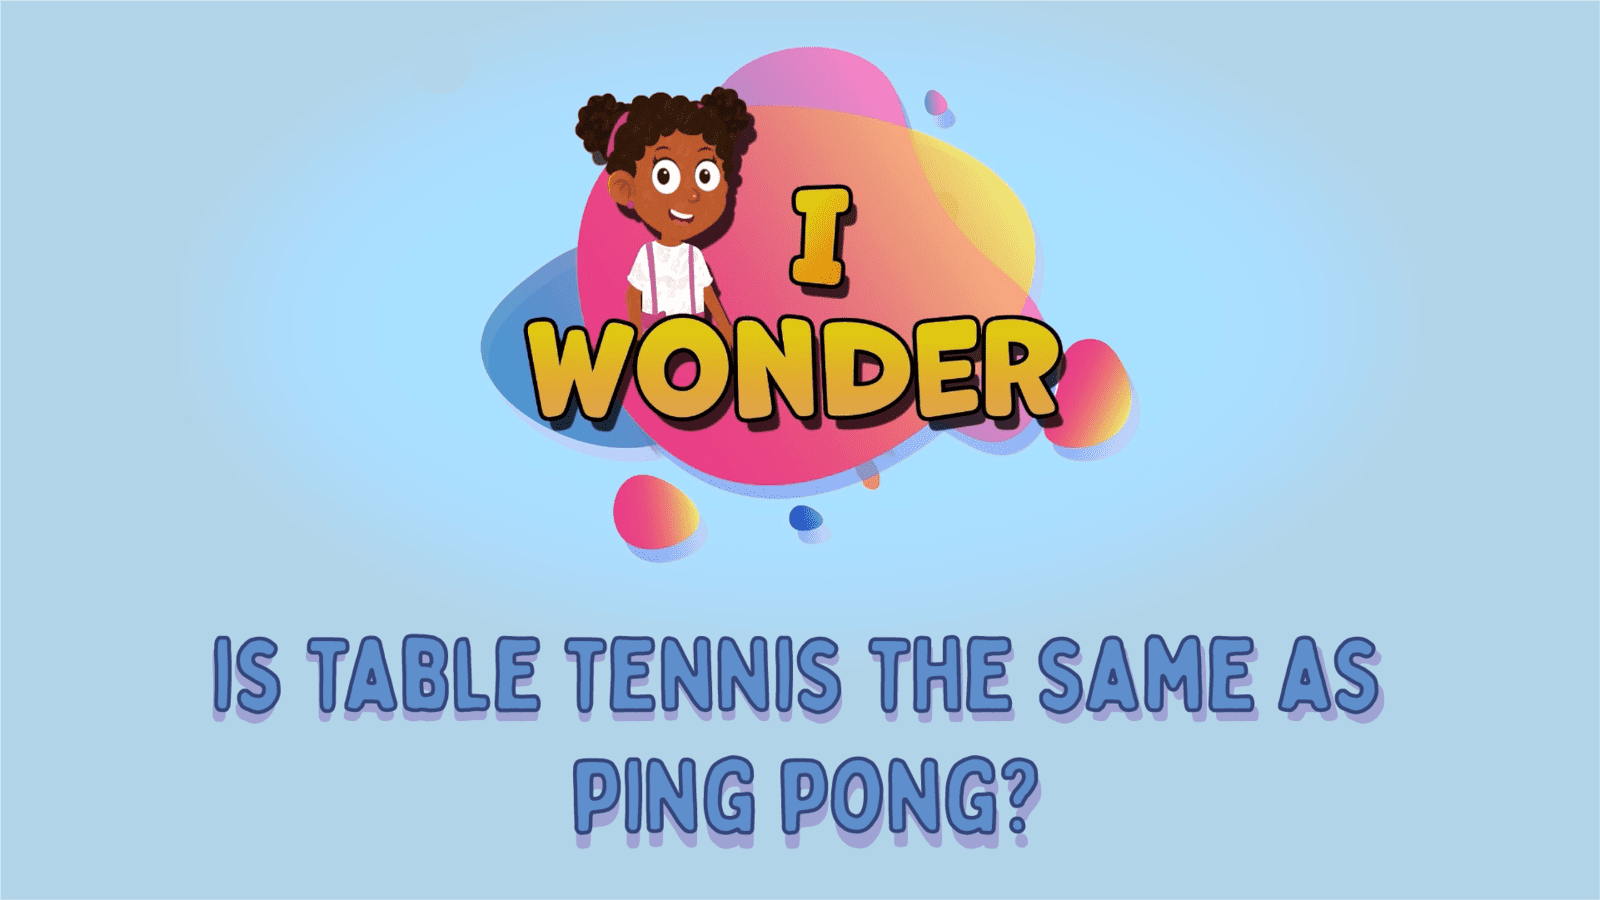 Is Table Tennis The Same As Ping Pong?